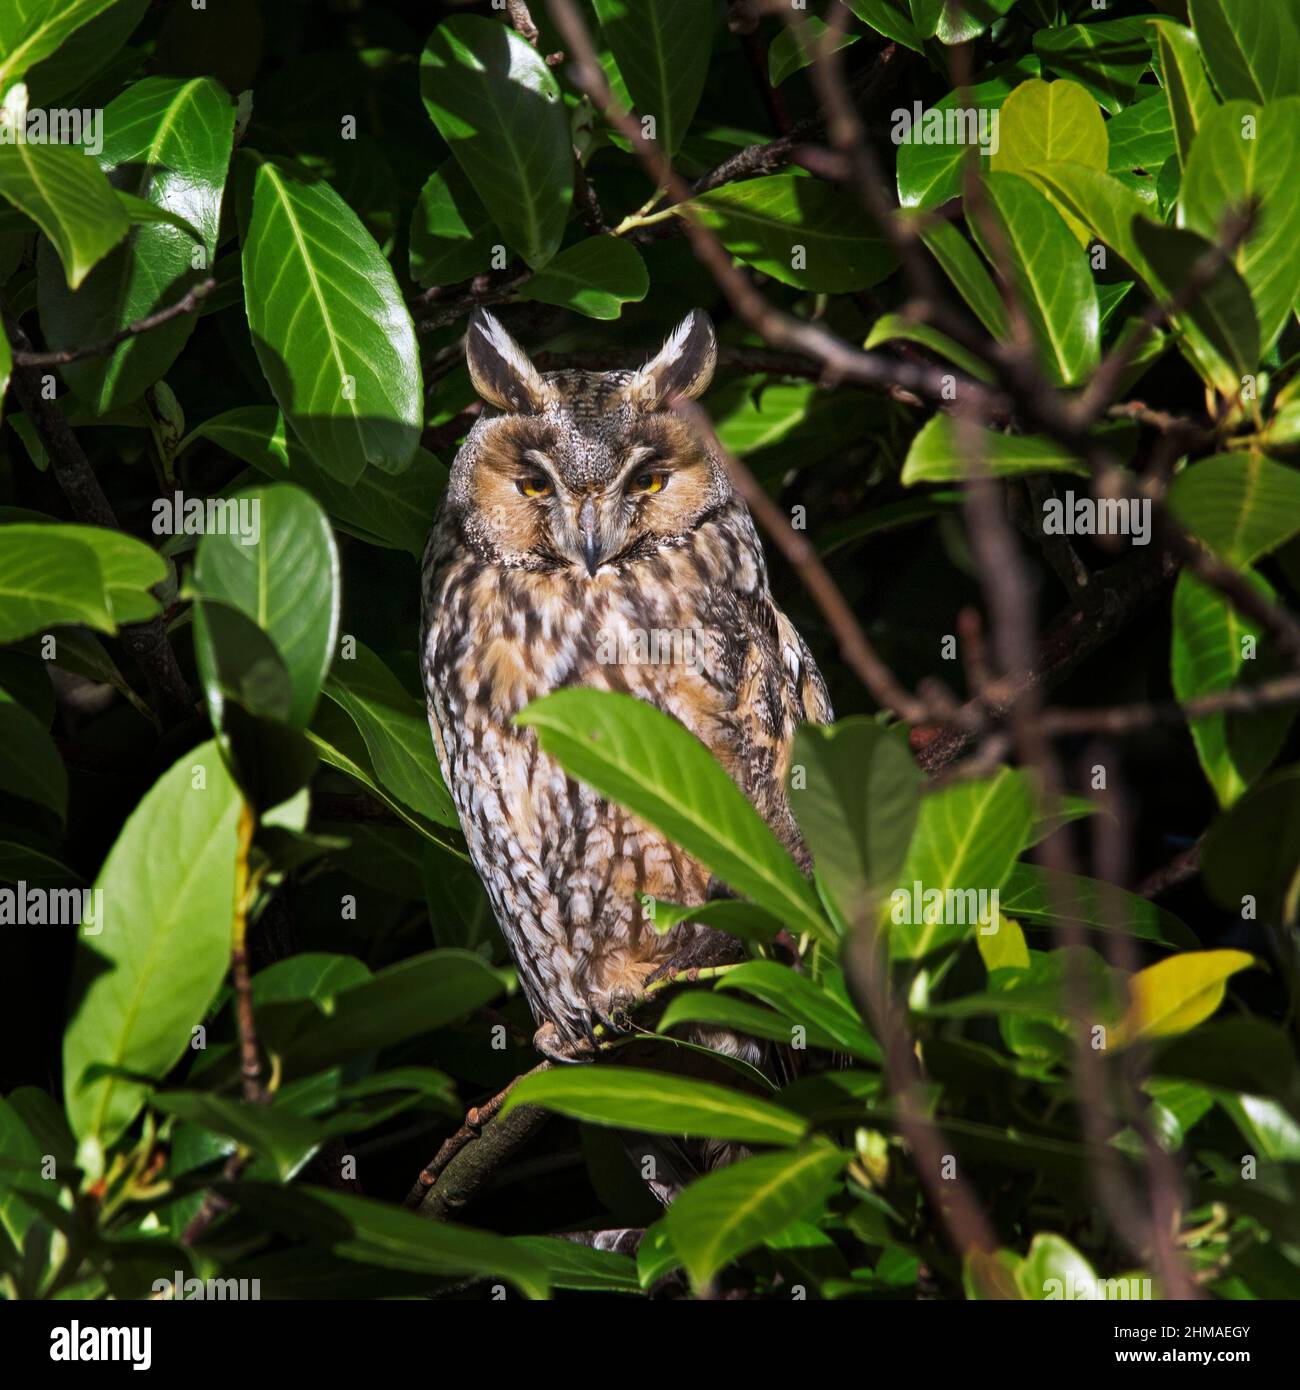 Long-eared owl (Asio otus) perched in cherry laurel / common laurel tree in garden and sunbathing on a cold day in winter Stock Photo